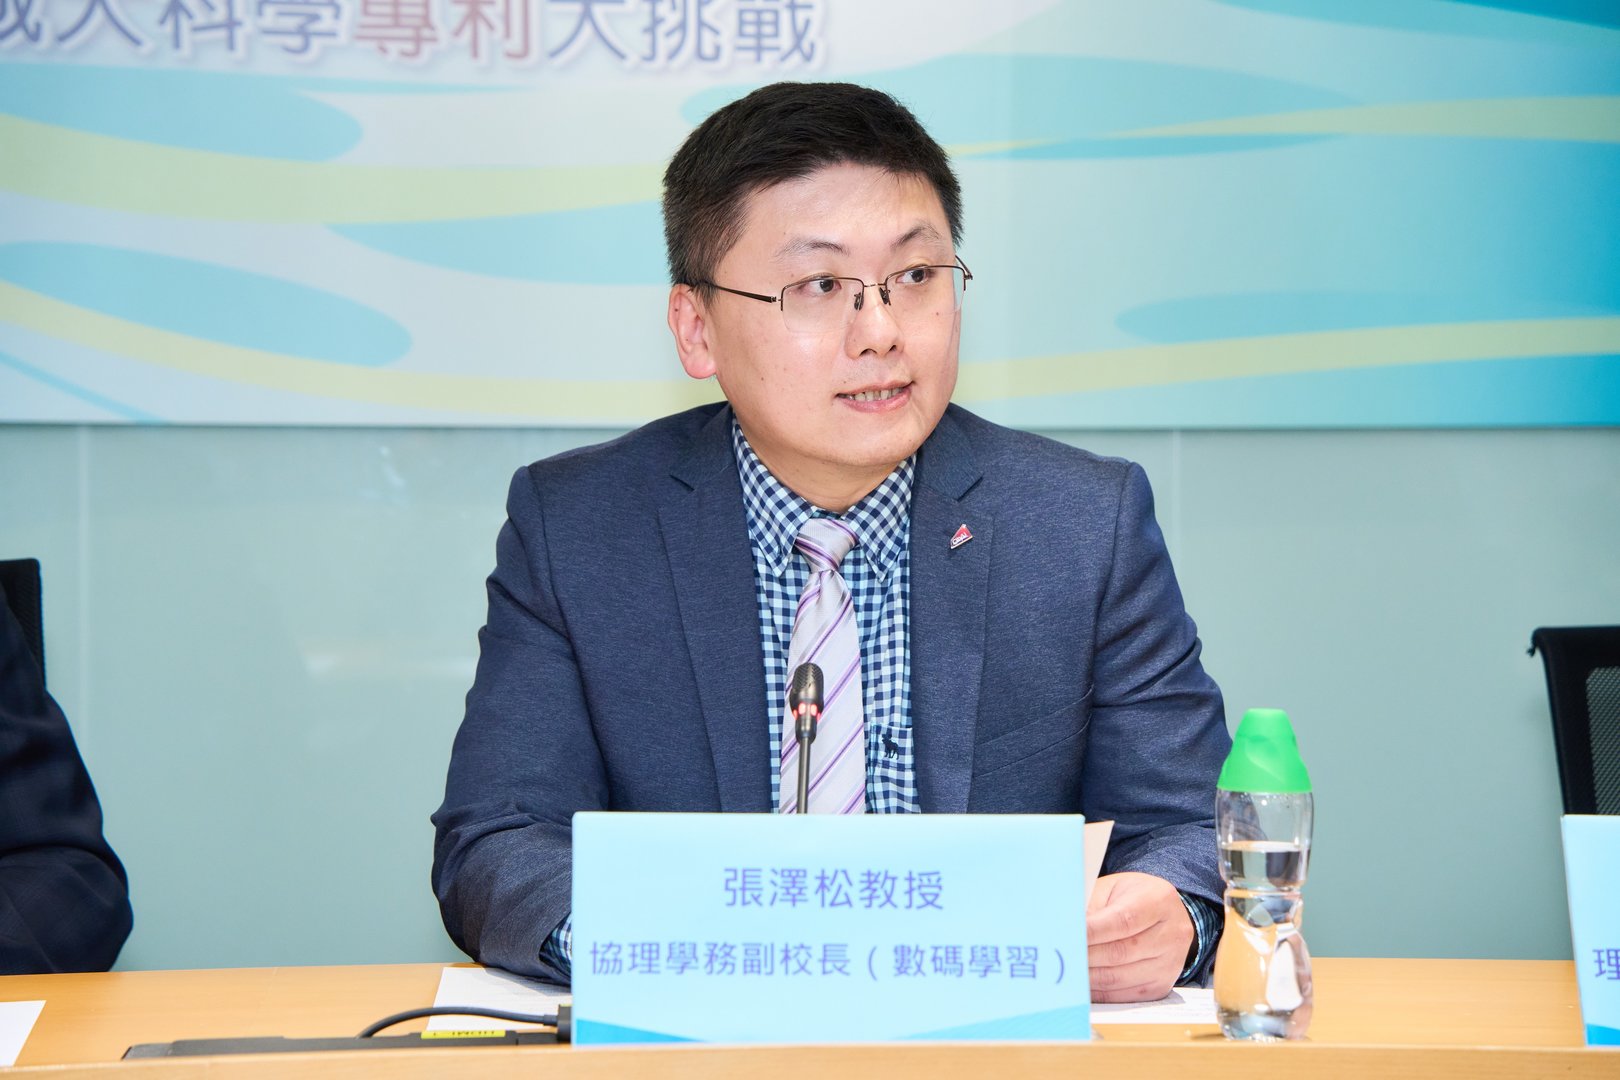 Professor Ray Cheung, Associate Provost (Digital Learning) in the Office of the Provost and Deputy President, first delivered a welcoming speech at the press conference.